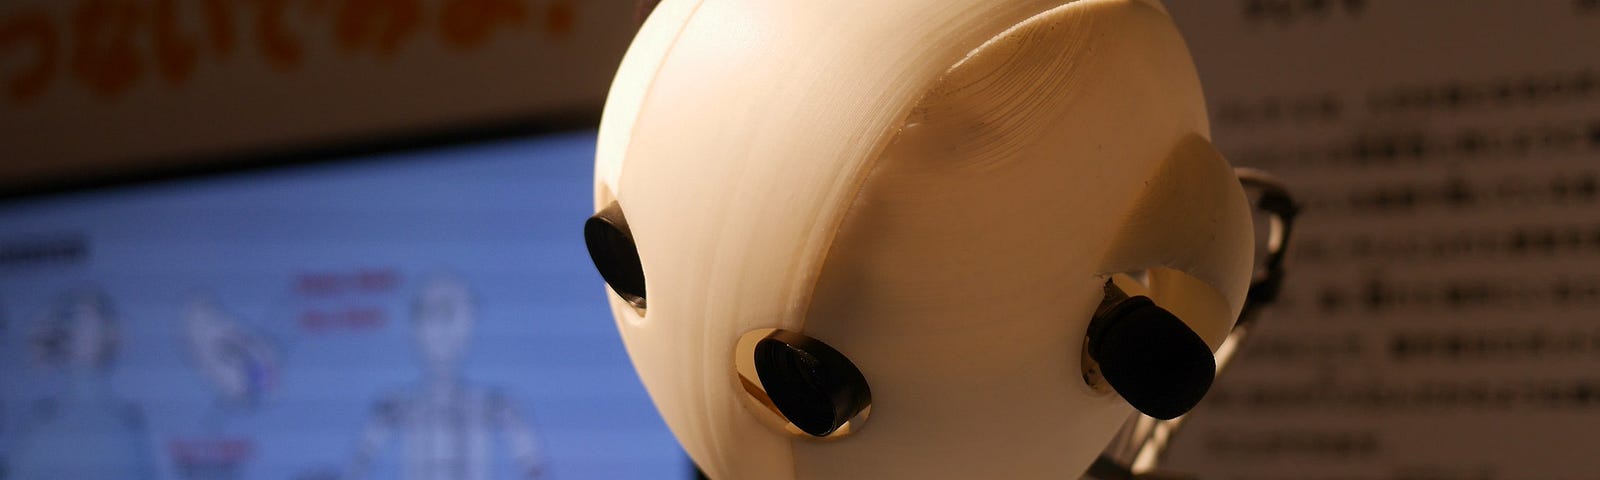 The simple, white, round head of a robot with an exhibit behind it.